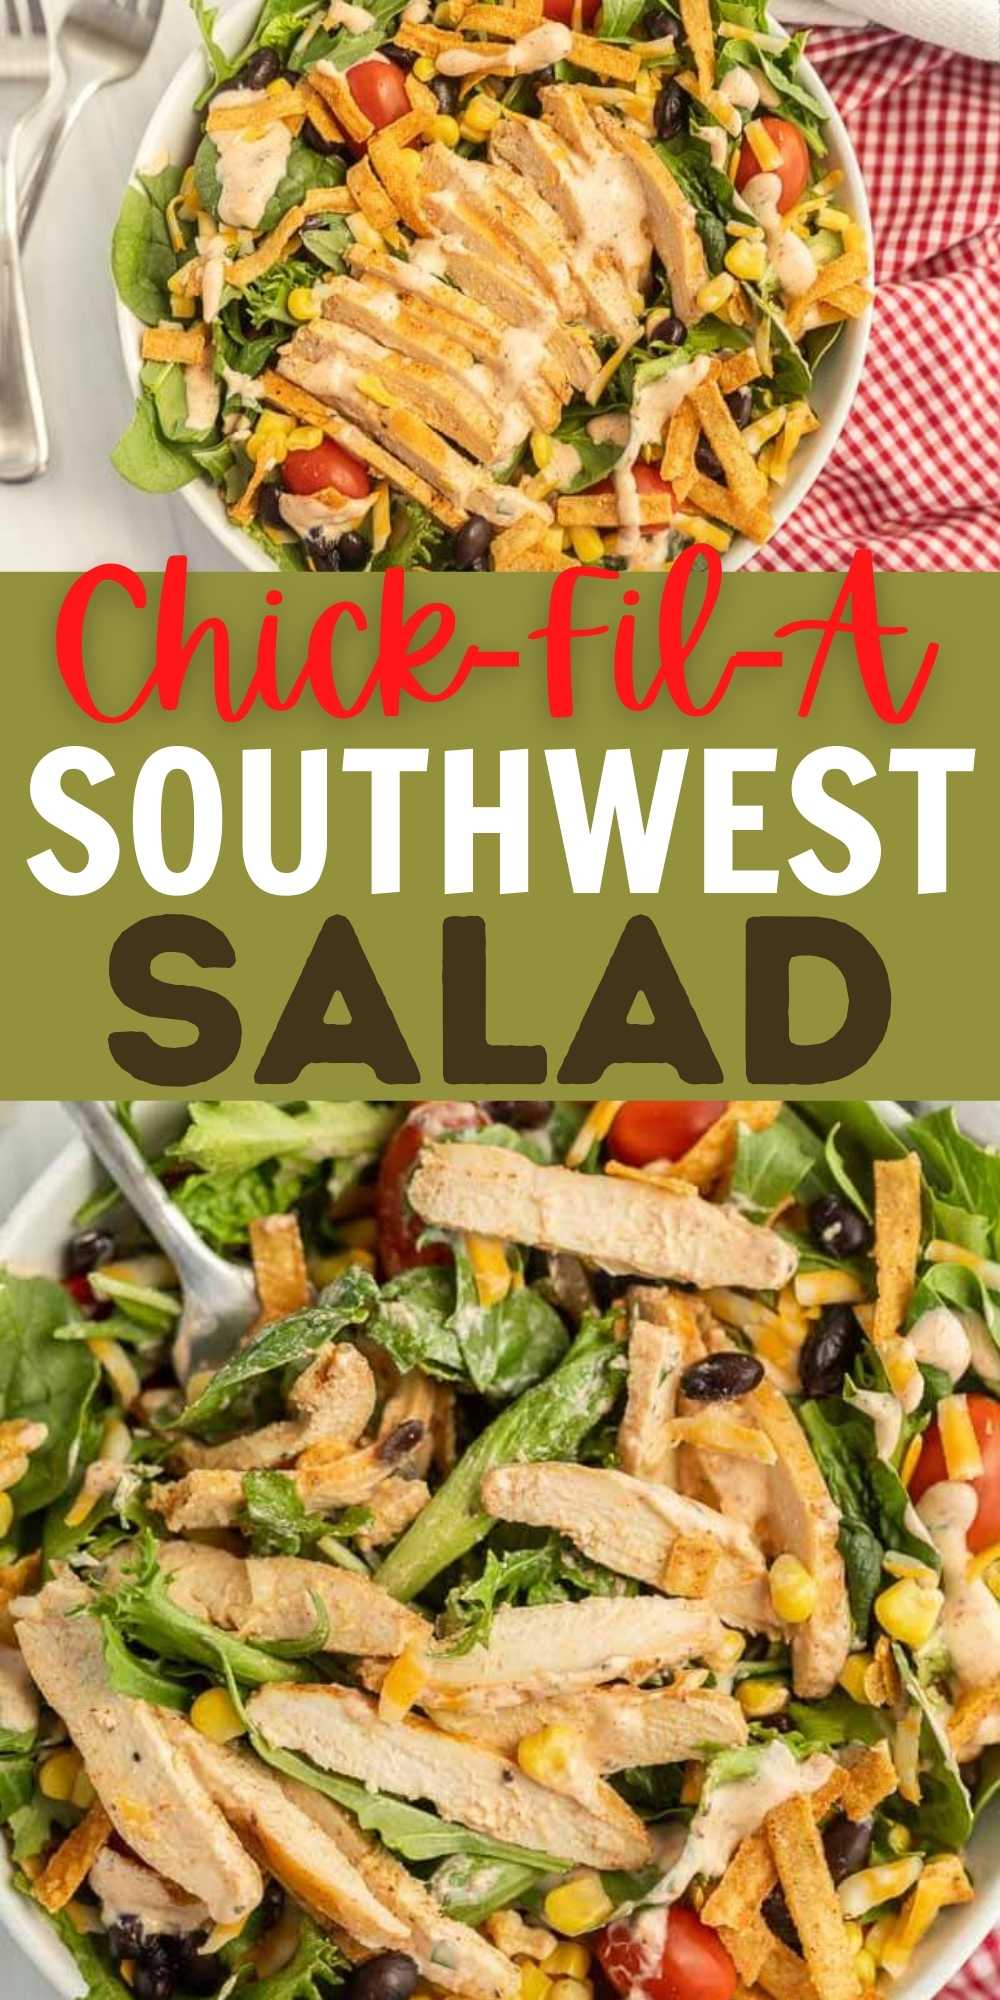 This Copycat Chick-fil-a Spicy Southwest Salad is  healthy and tastes amazing too. It tastes just like the spicy southwest chicken salad from Chick-fil-A. It's nutritious, delicious, and super easy to make too! #eatingonadime #saladrecipes #copycatrecipes #chickenrecipes 
